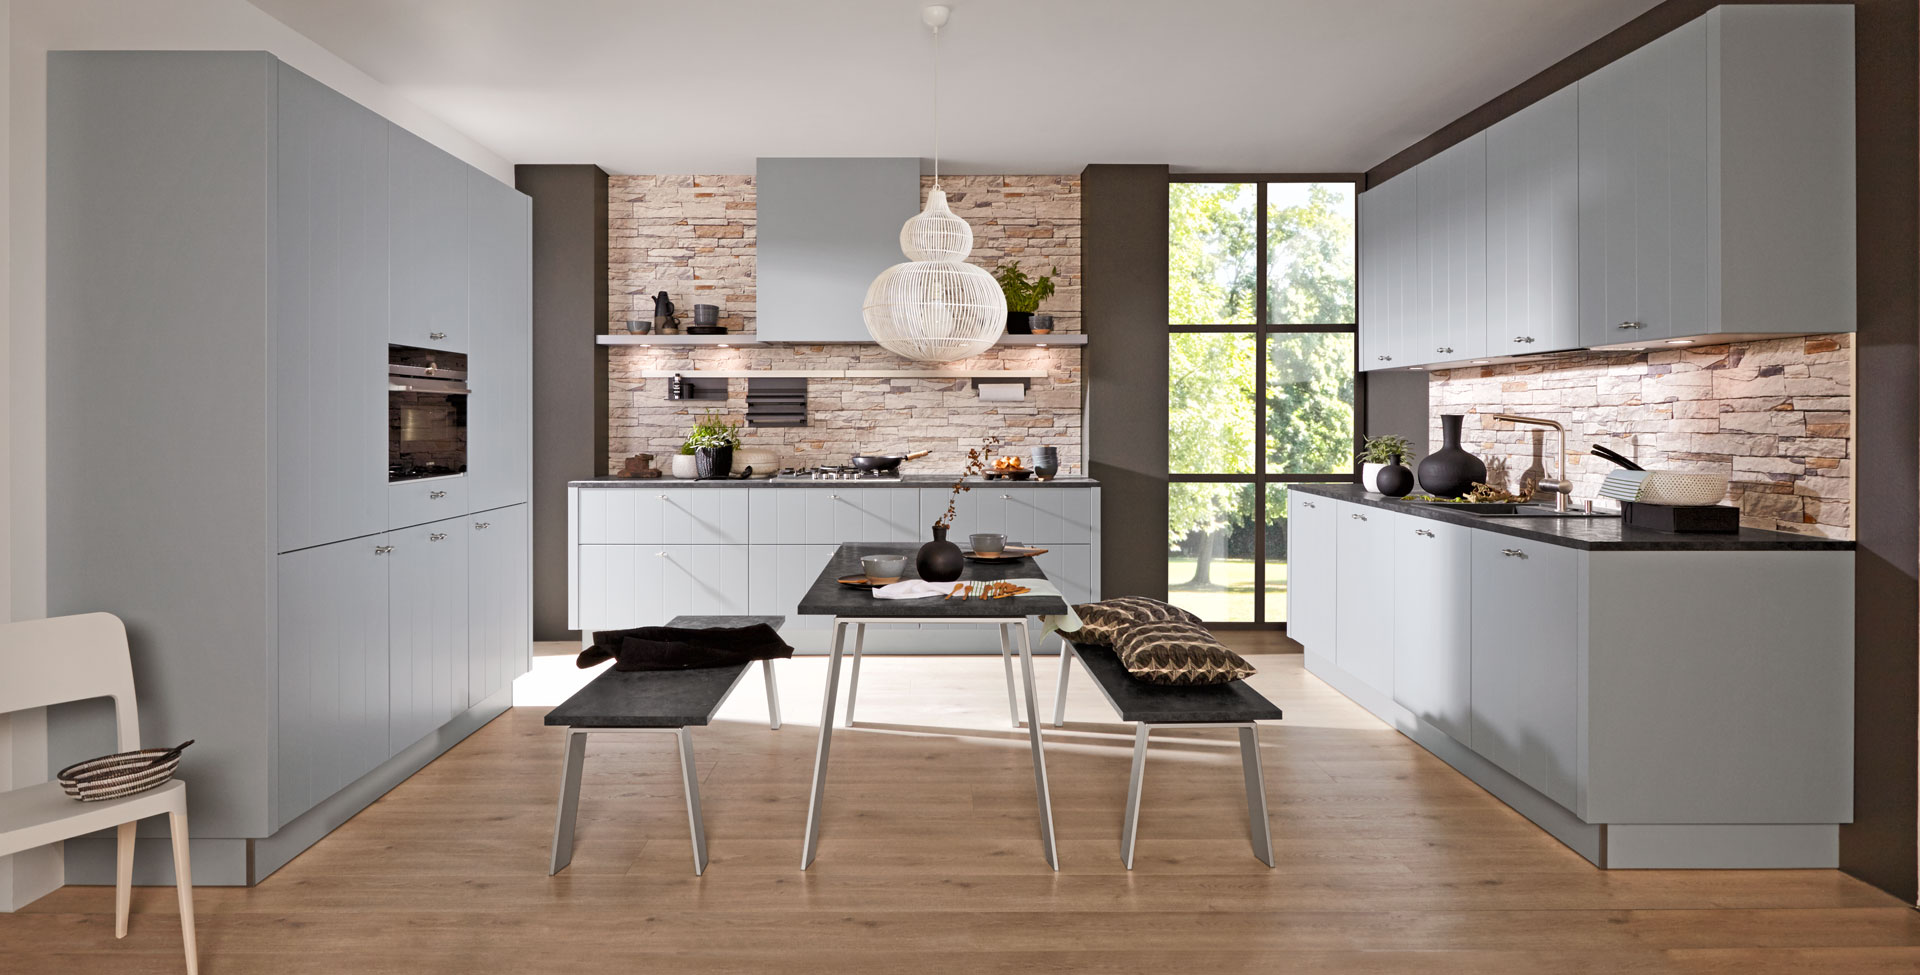 Transformational Kitchen design from J2 Design Concepts of Bolton